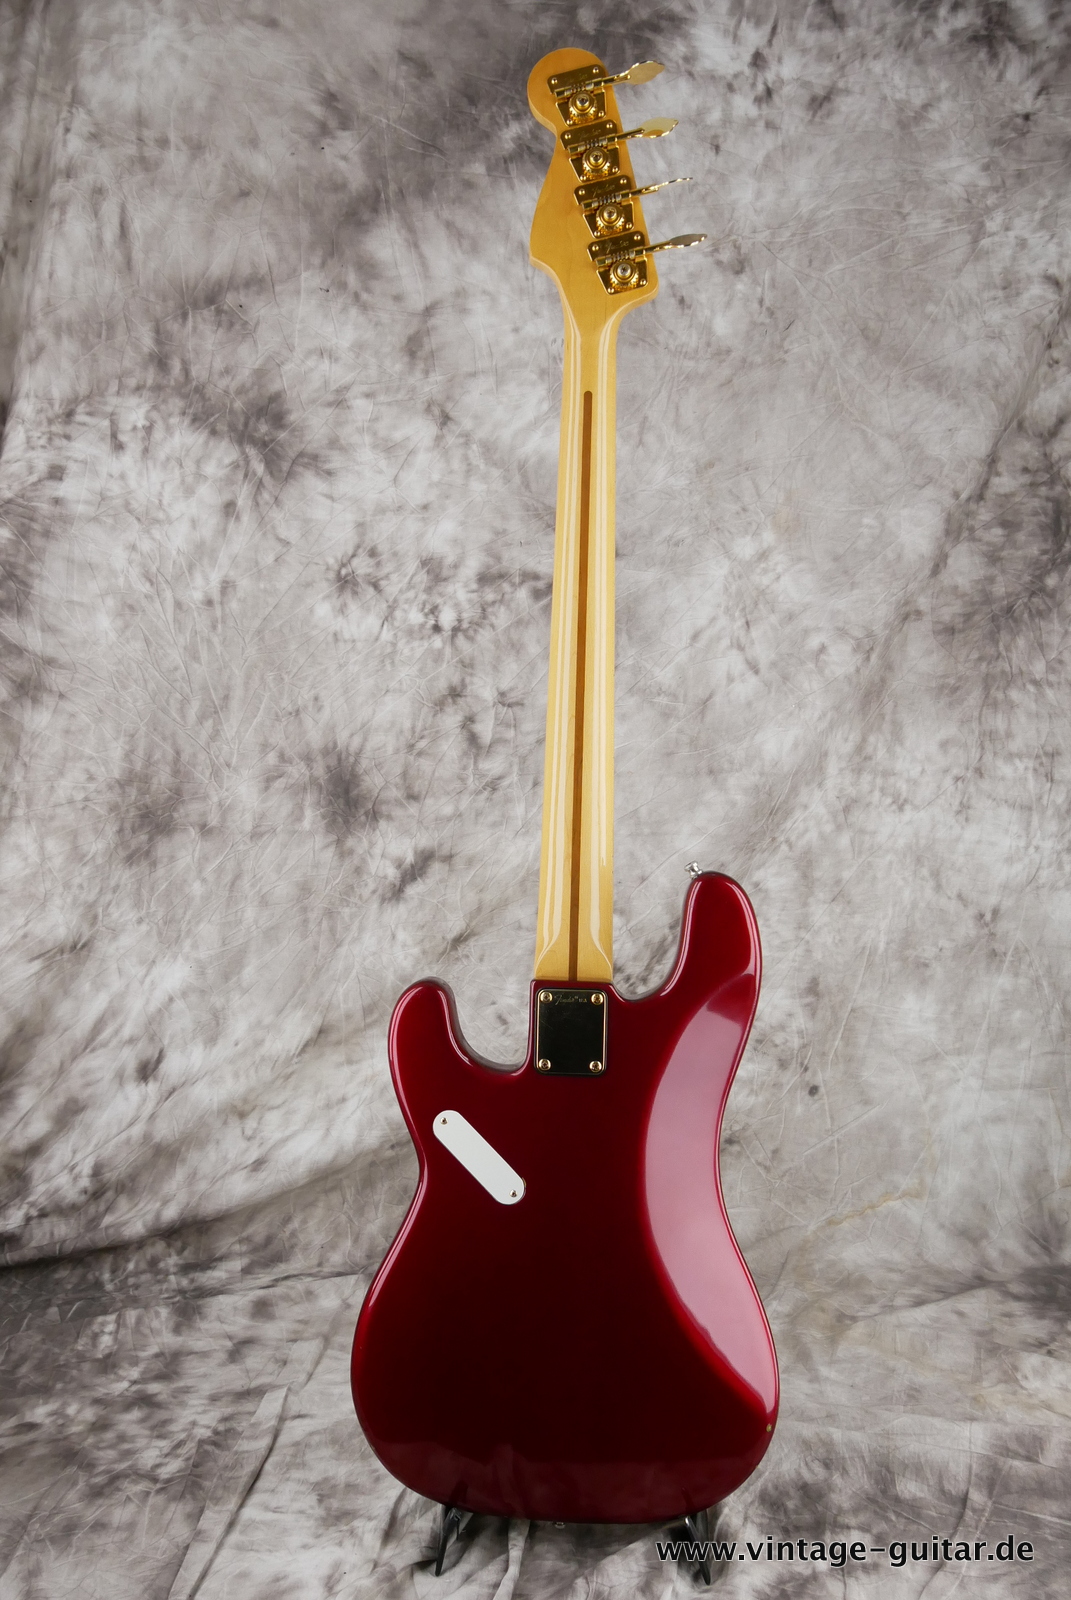 Fender_Precision_Special_USA_candy_apple_red_1982-002.JPG